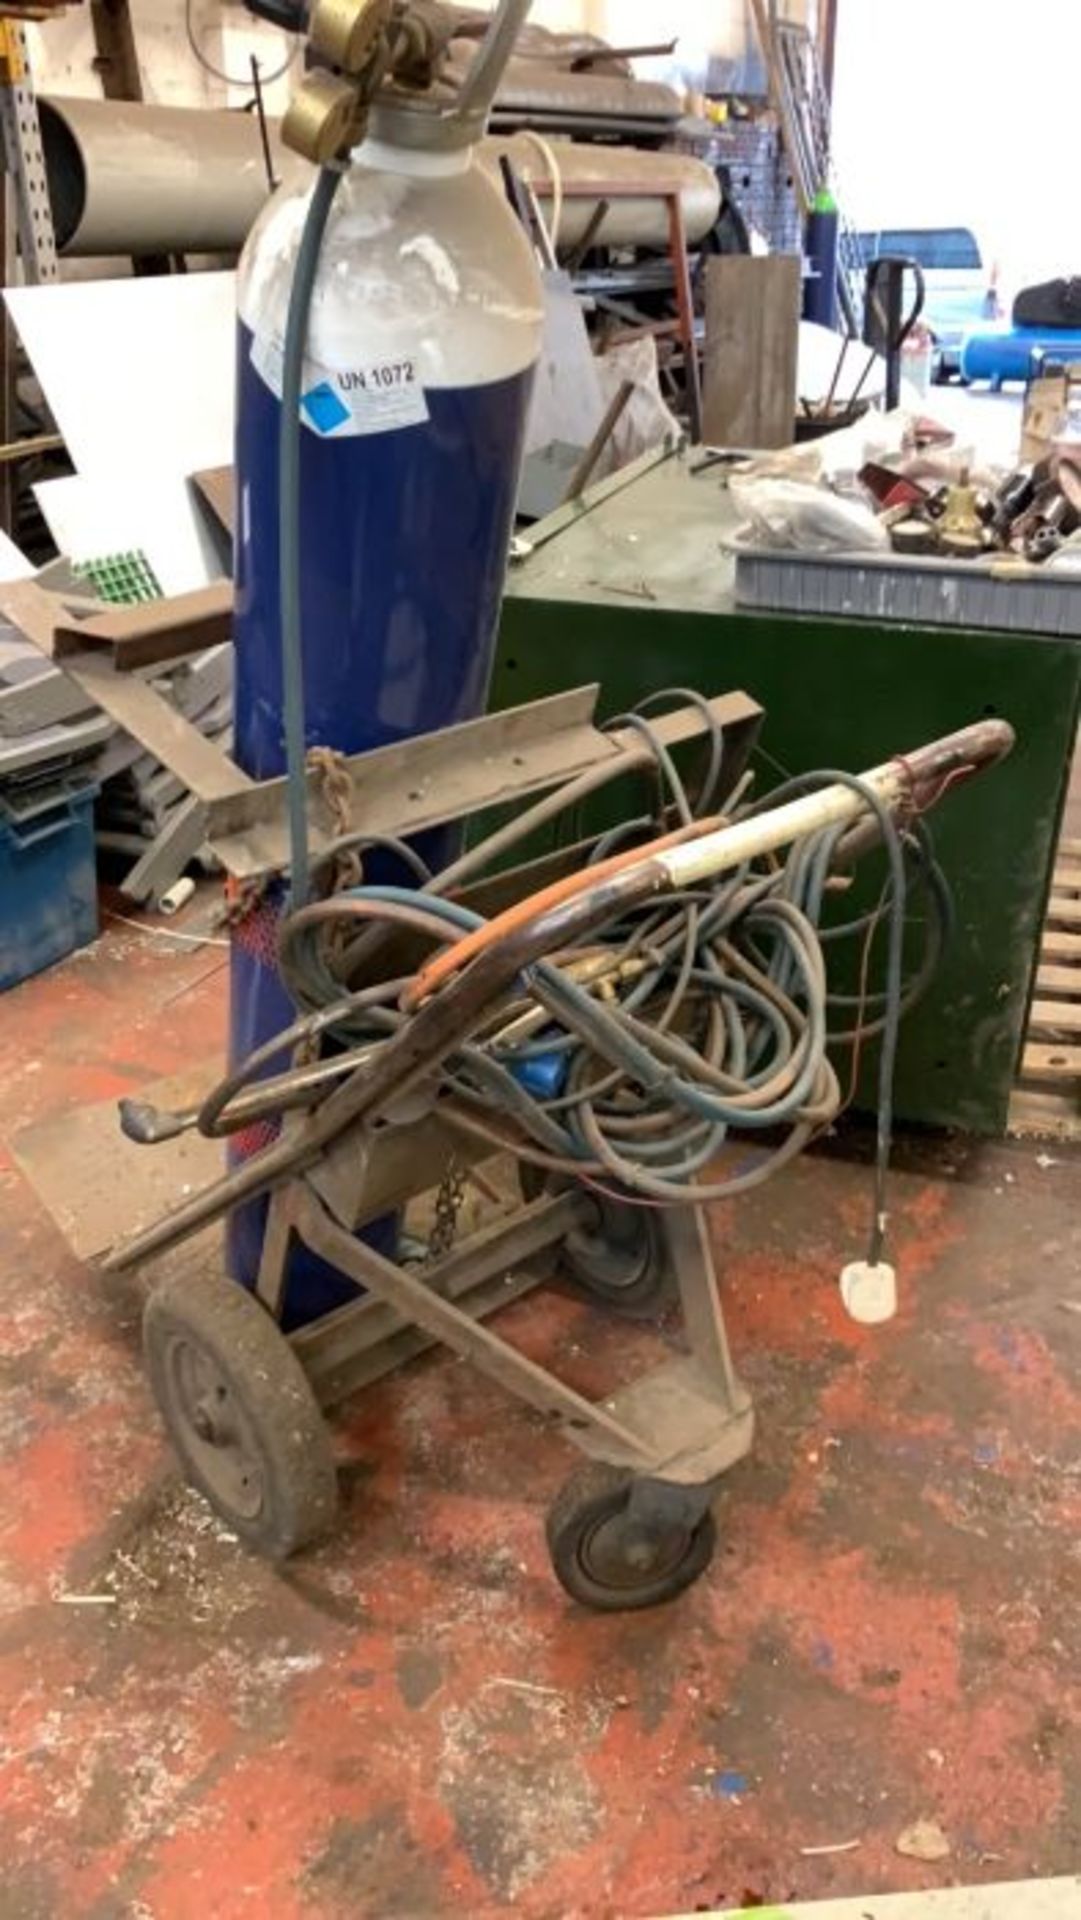 Oxyacetylene Cutting Torch, Gauges and Trolley - does not include gas bottle